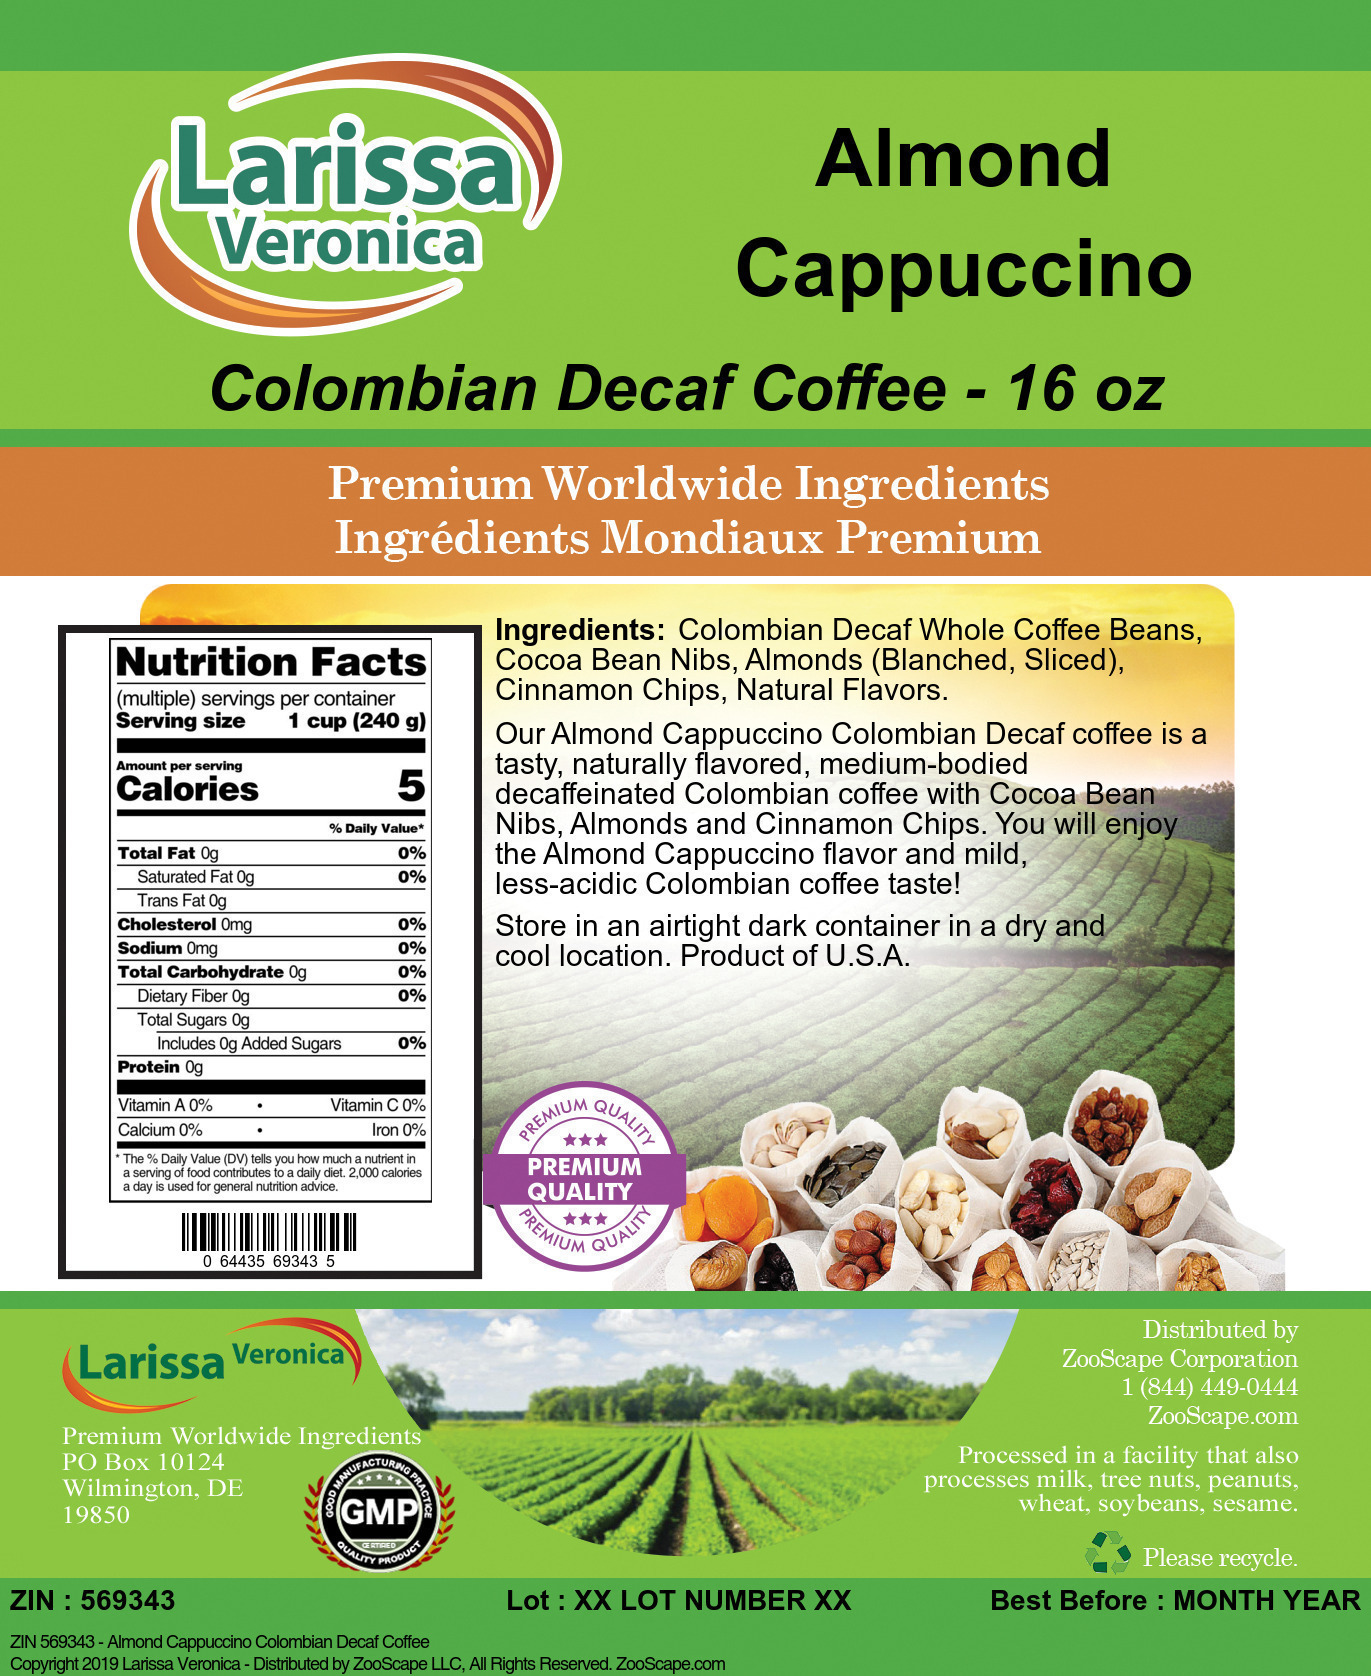 Almond Cappuccino Colombian Decaf Coffee - Label